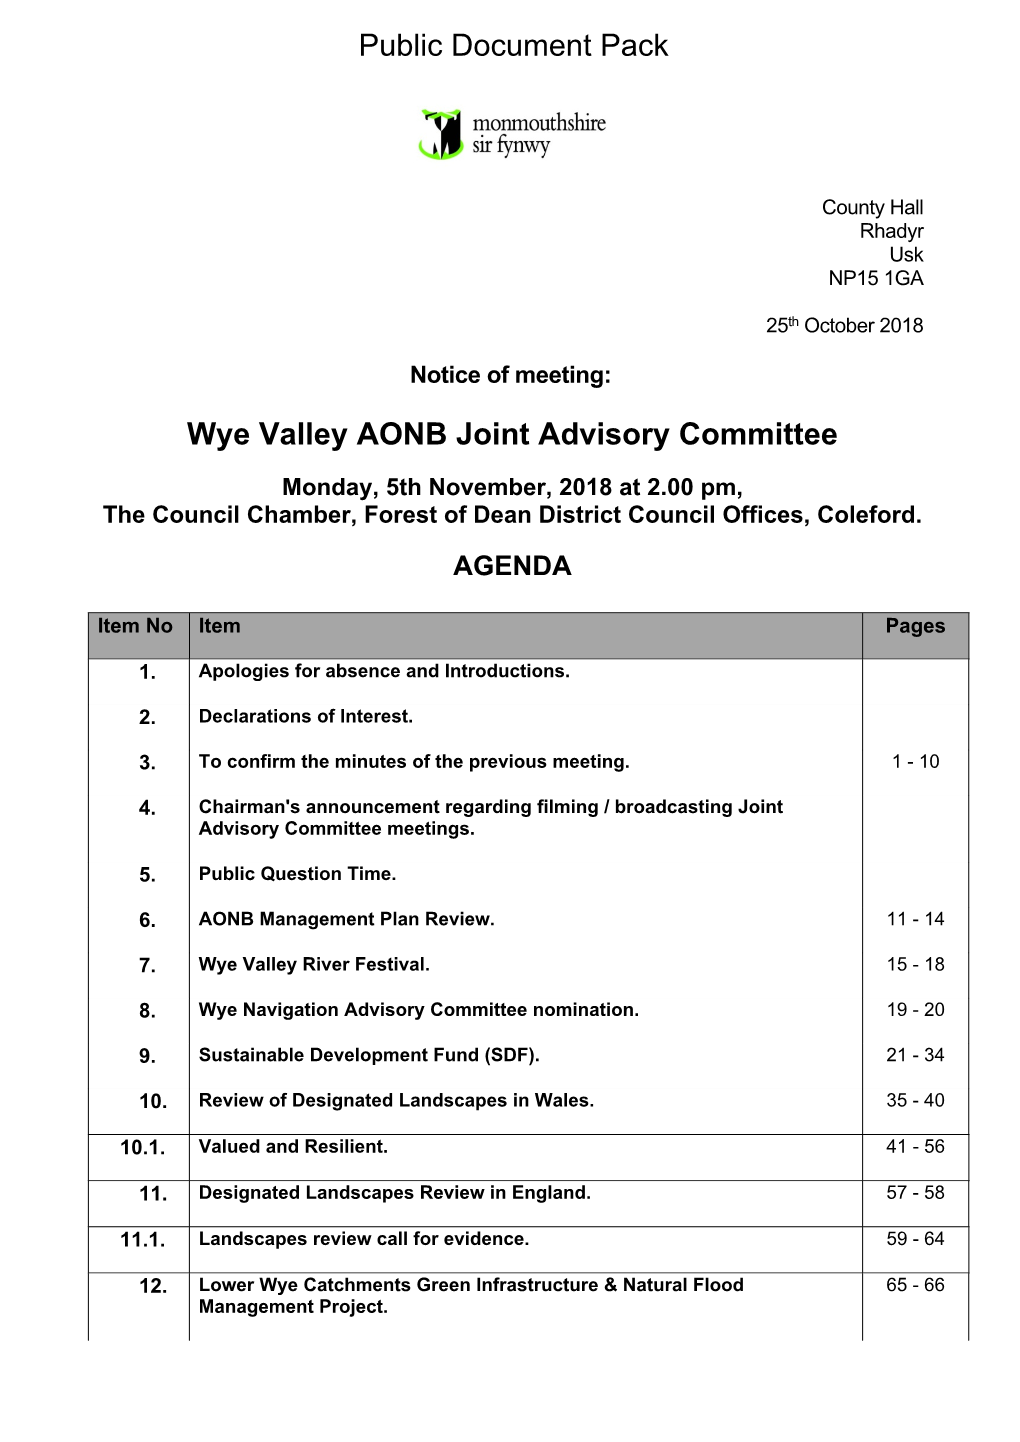 (Public Pack)Agenda Document for Wye Valley AONB Joint Advisory